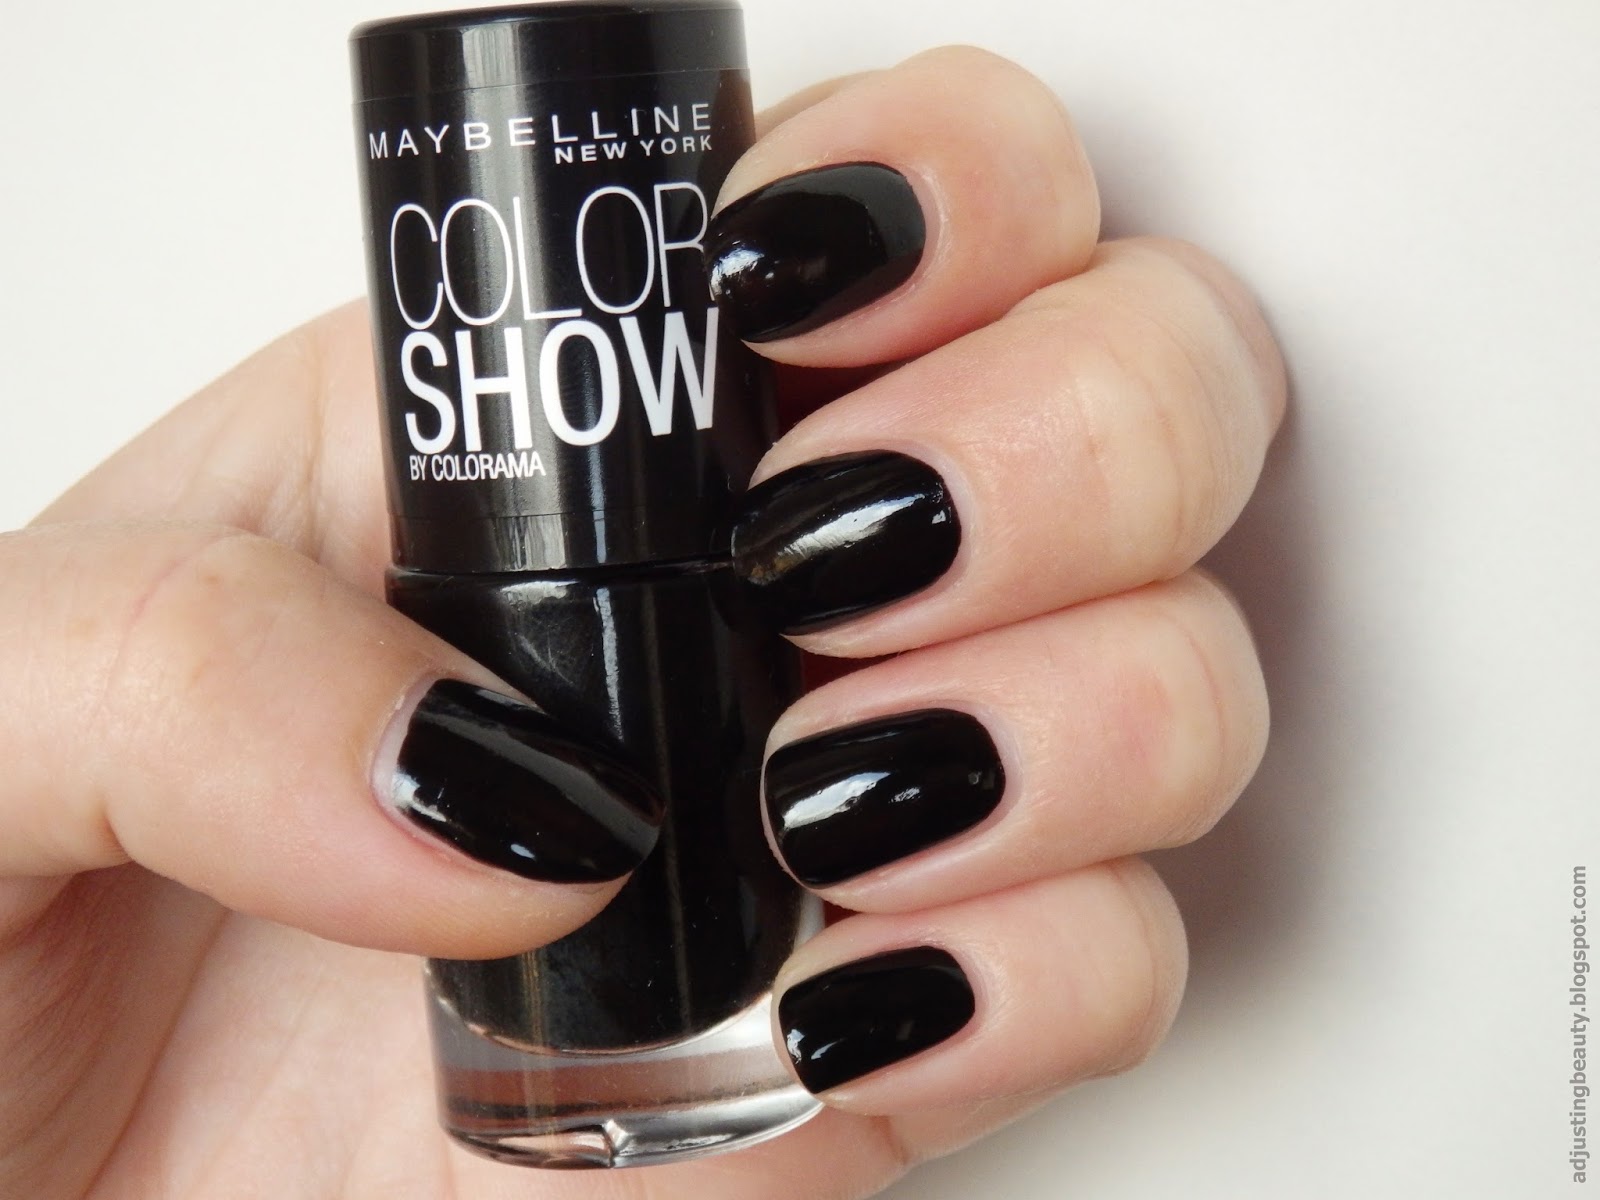 Maybelline Color Show Matte Nail Polish - wide 7